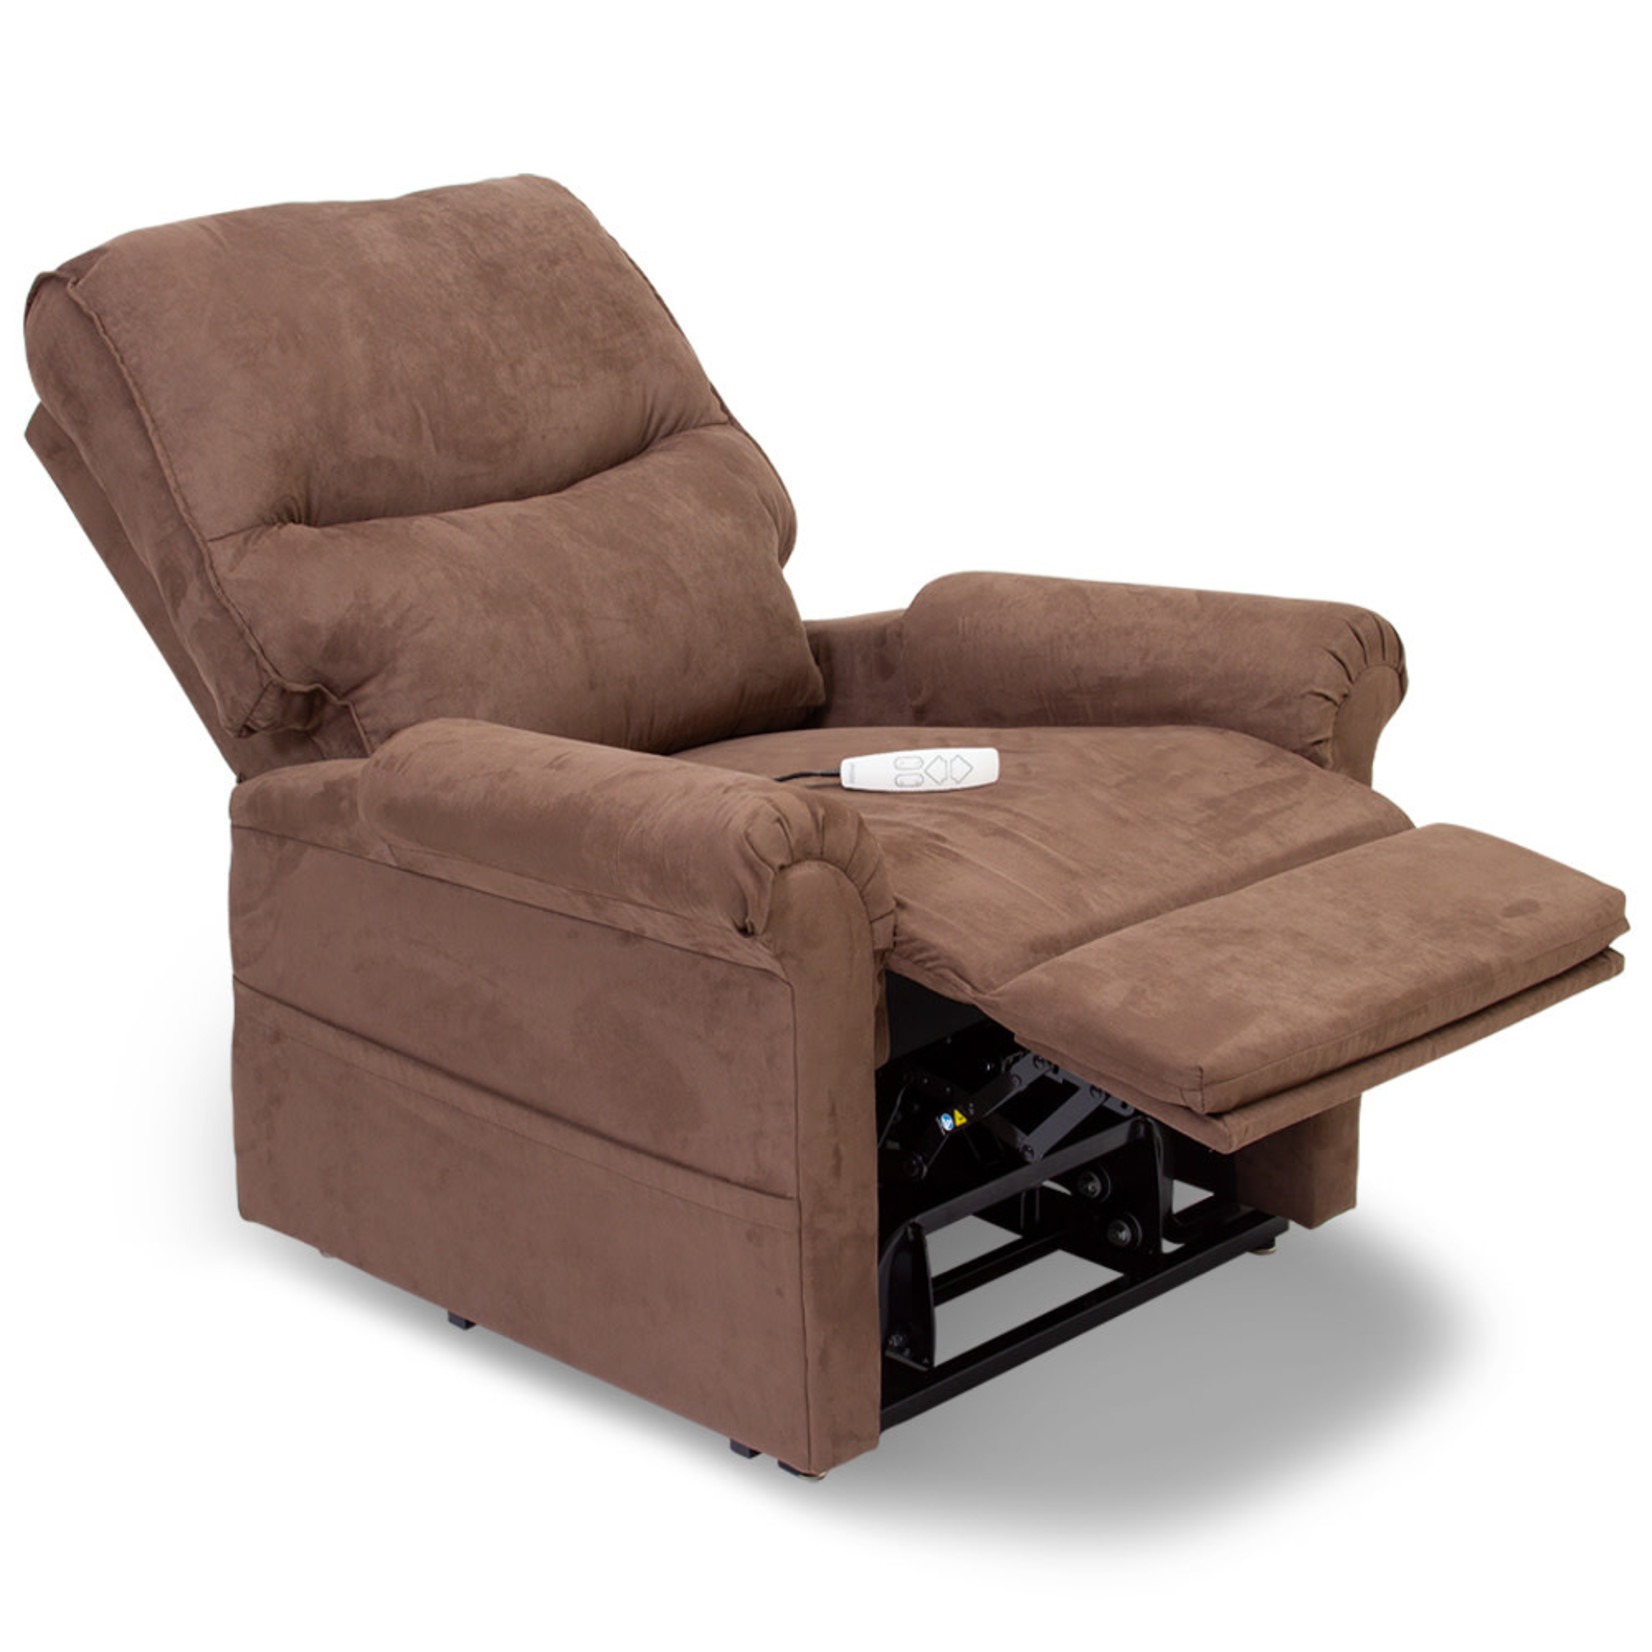 essential lc105 lift recliner shown in seated recline position